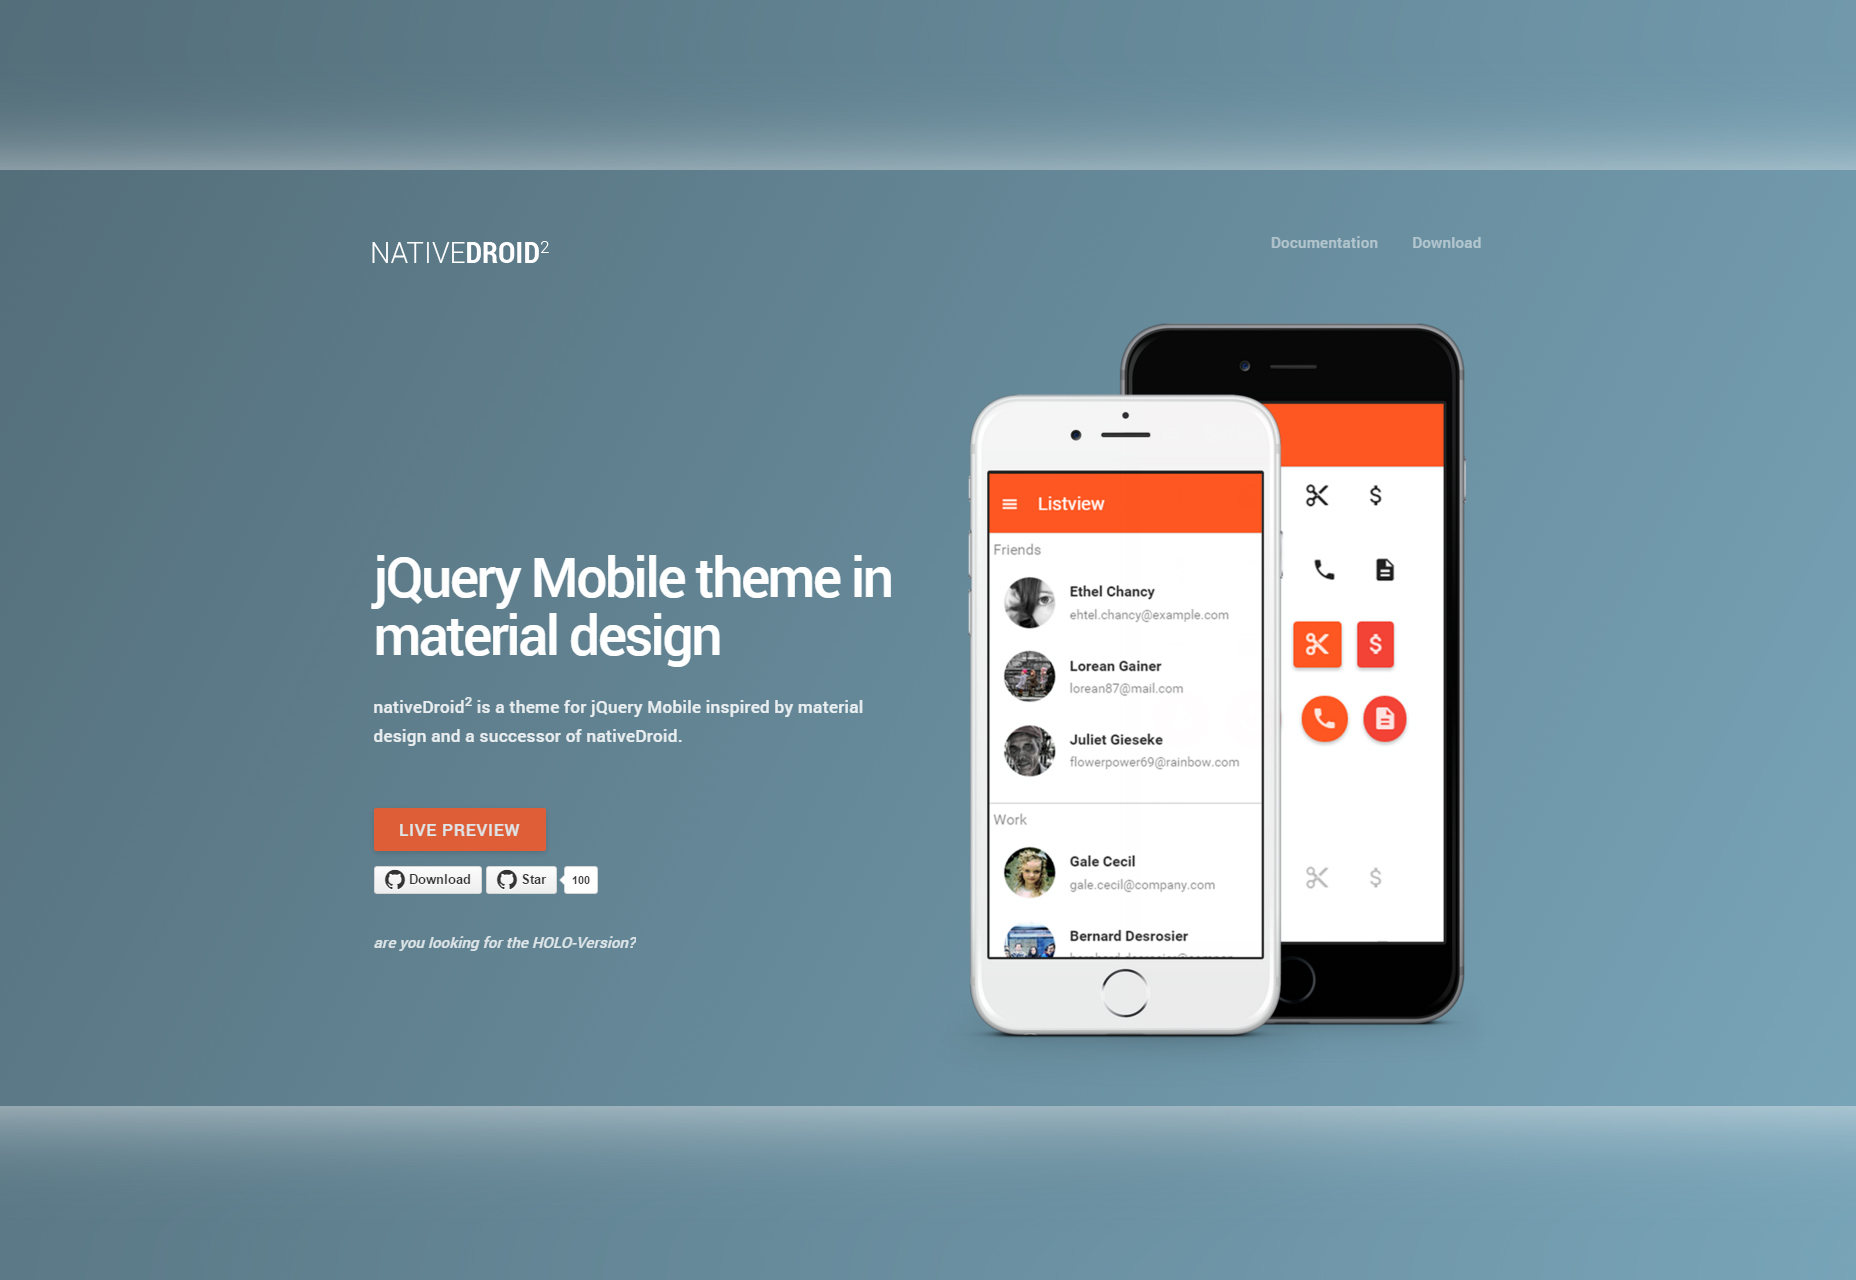 nativedroid2-material-design-theme-for-jquery-mobile